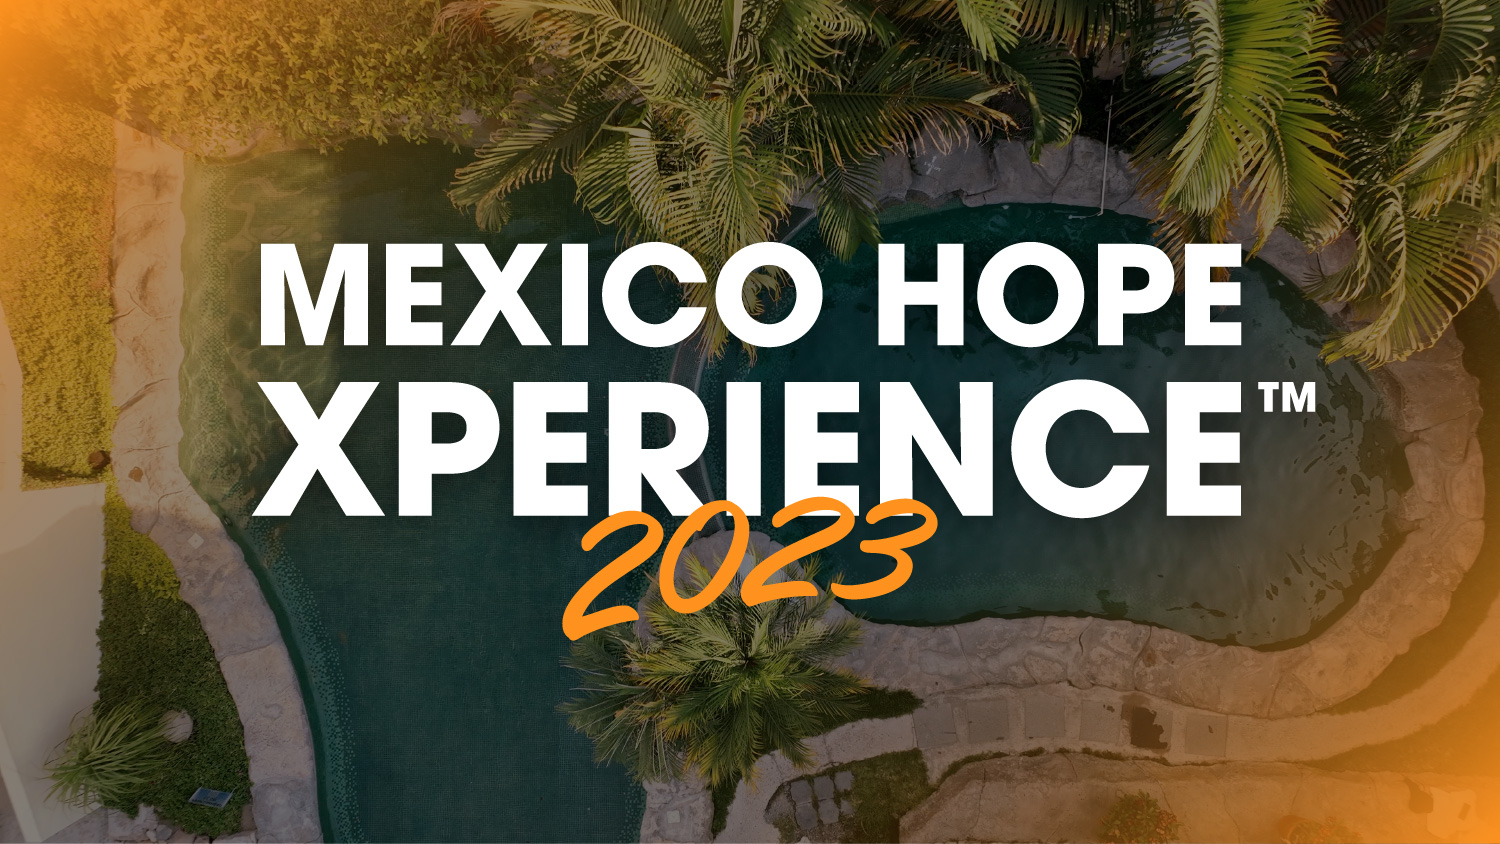 mexico hope xperience 2023 graphic